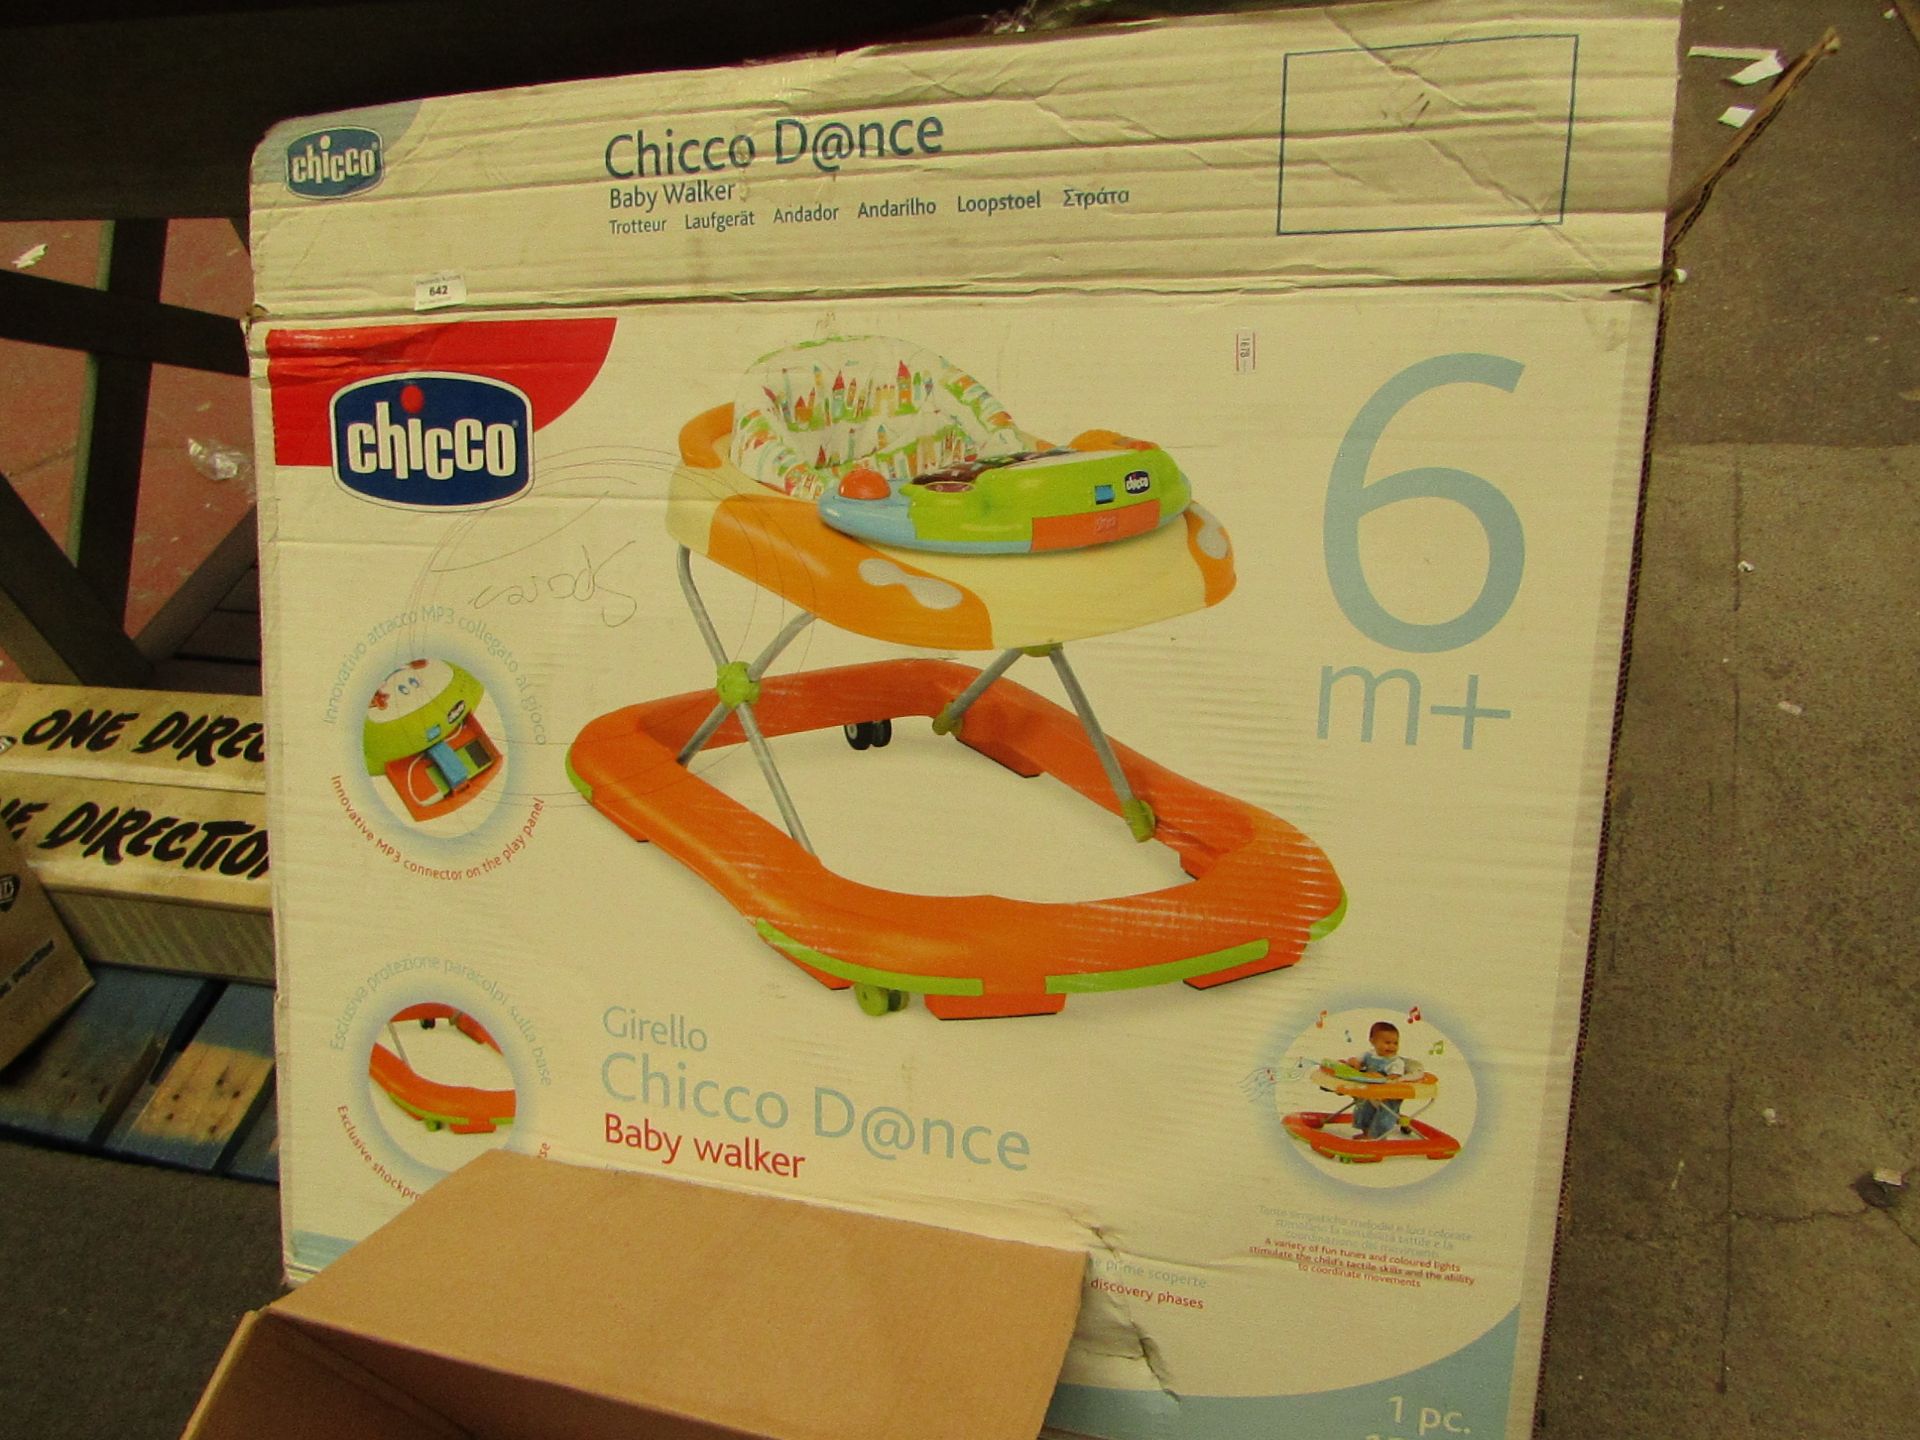 Chicco BabyWalker boxed unchecked